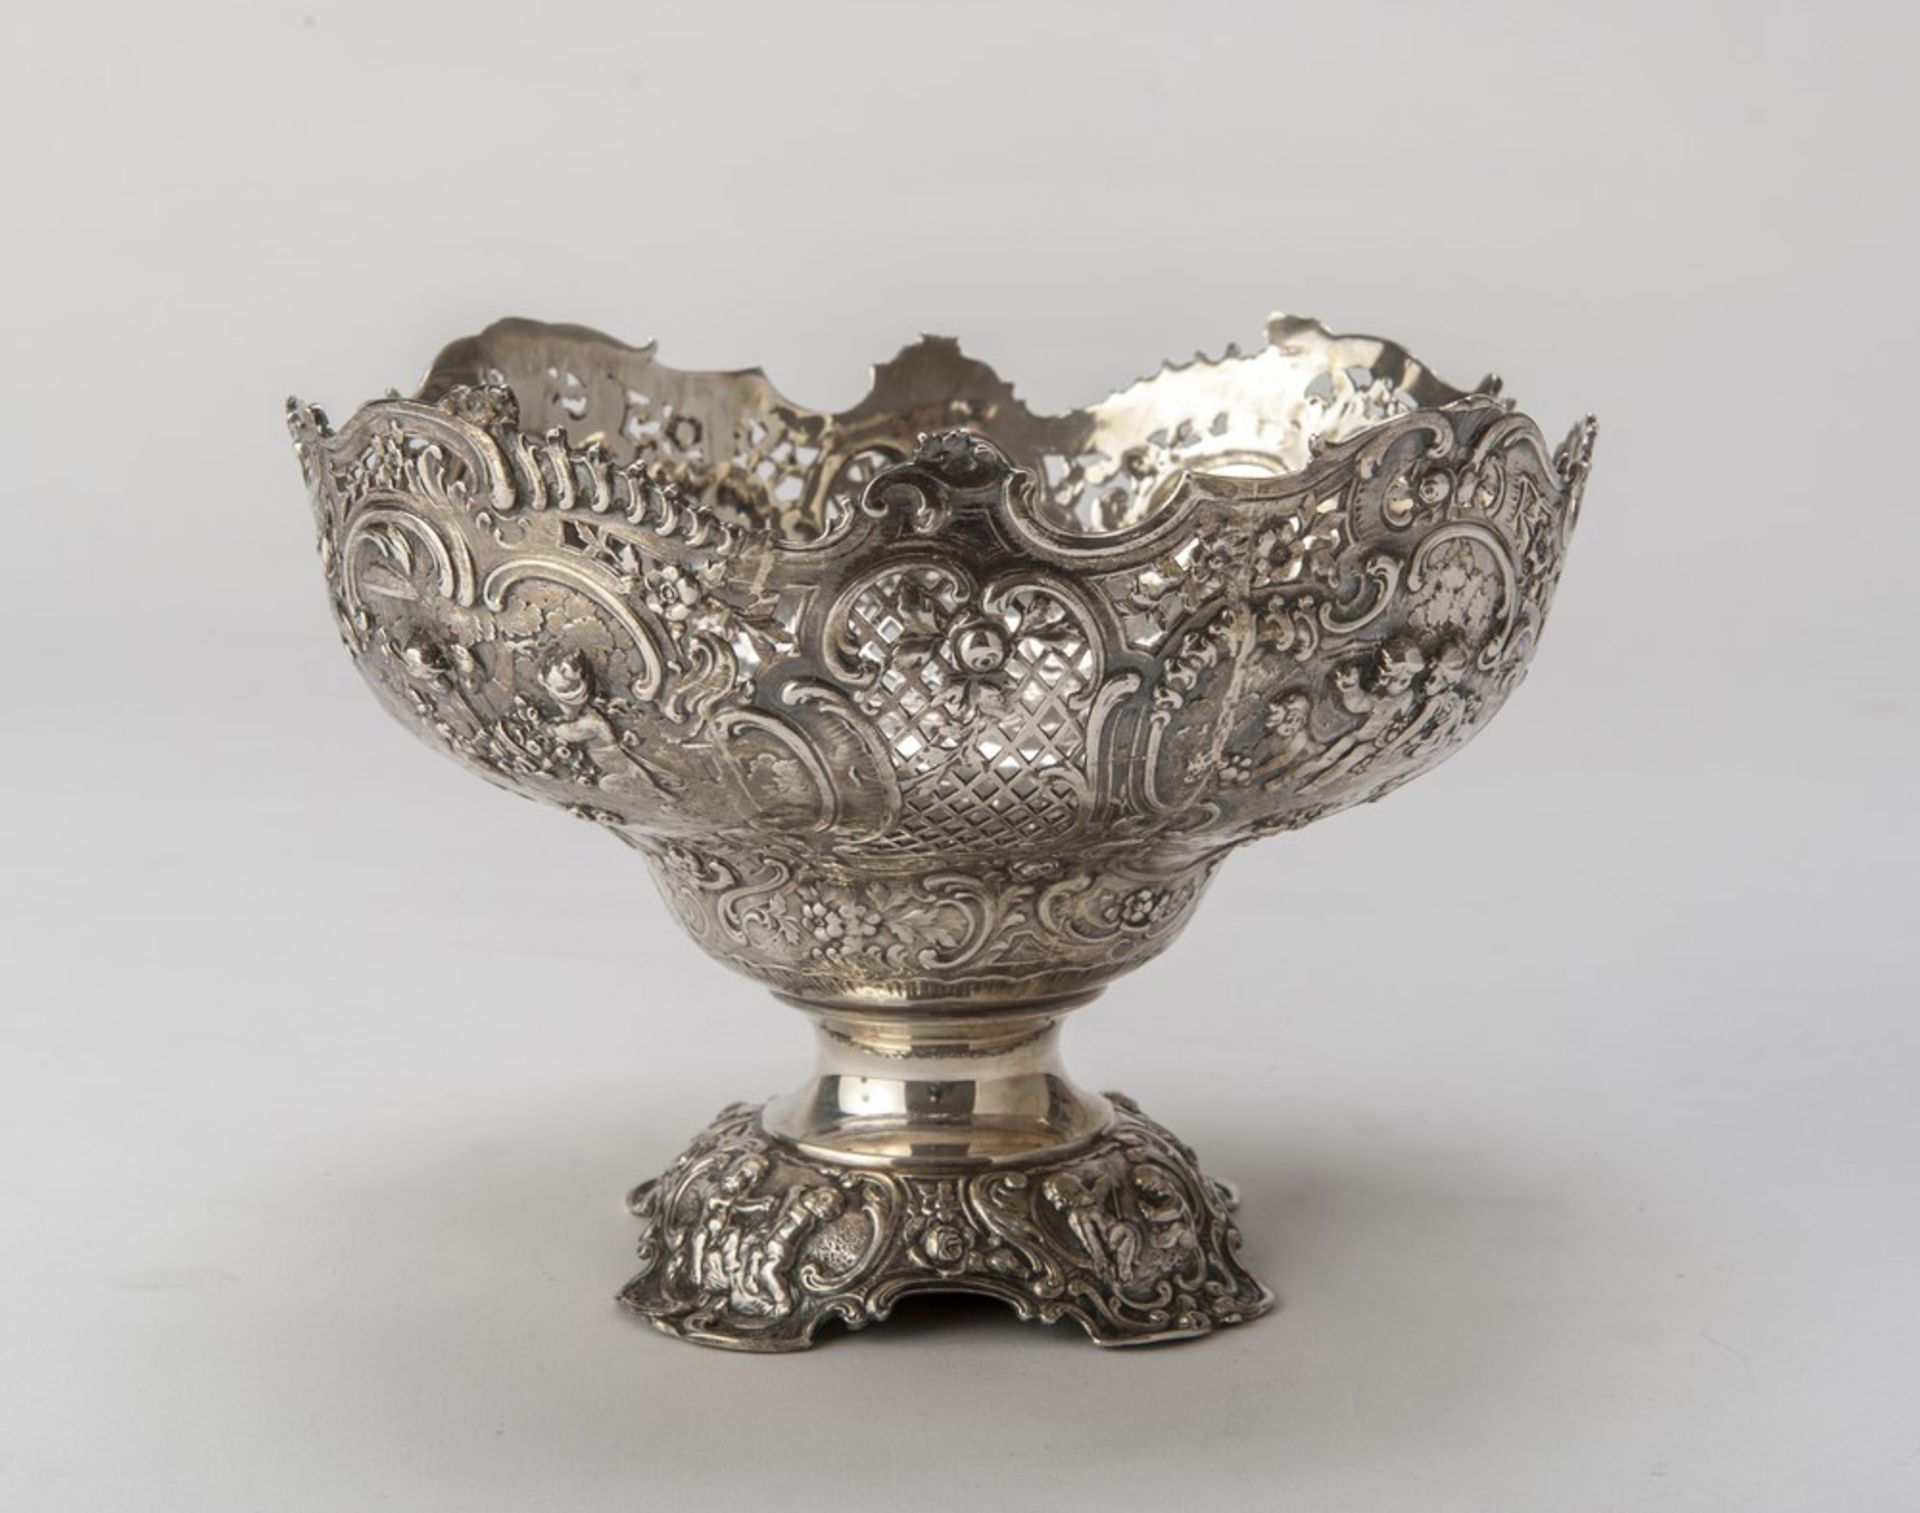 BEAUTIFUL SILVER CENTERPIECE, PUNCH FRANCE DIGIONE, END 18TH CENTURY basin pierced and embossed to